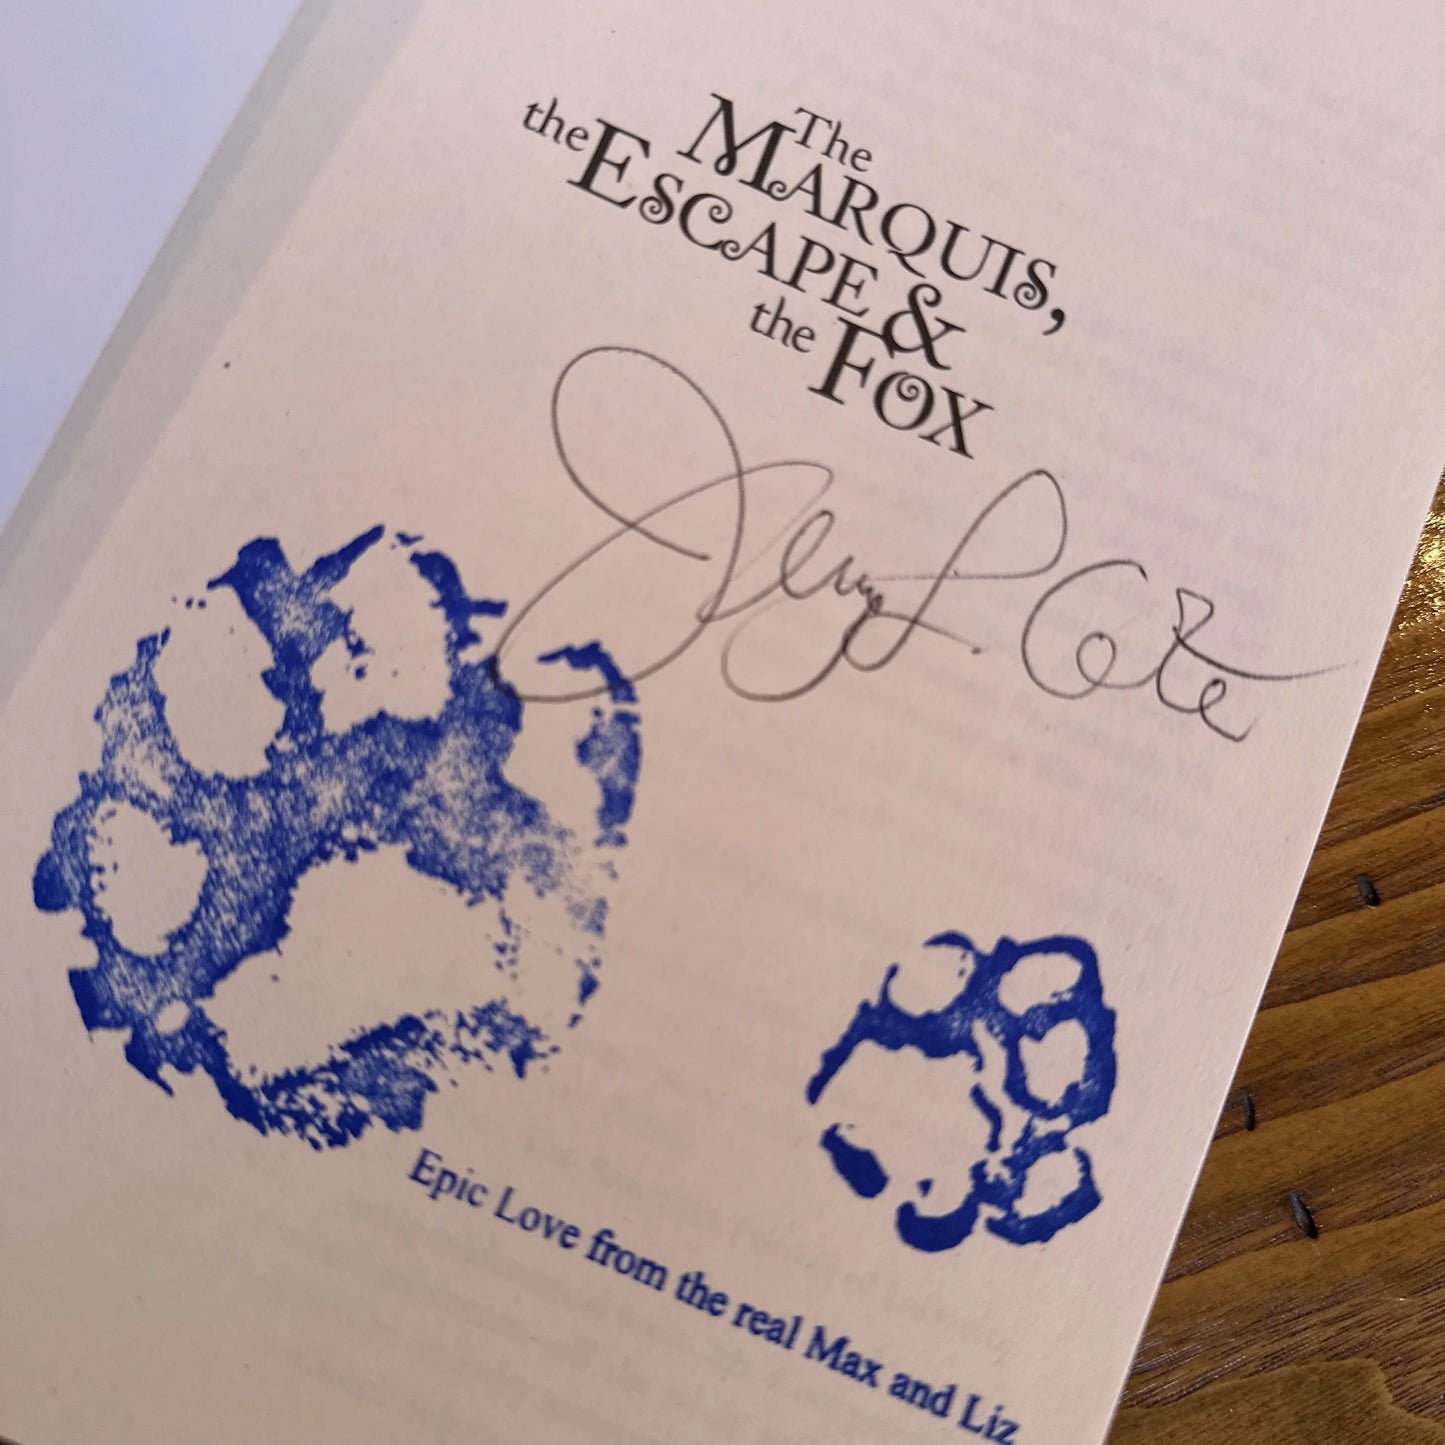 "The Marquis, the Escape, and the Fox" – Signed by the author, Jenny L. Cote